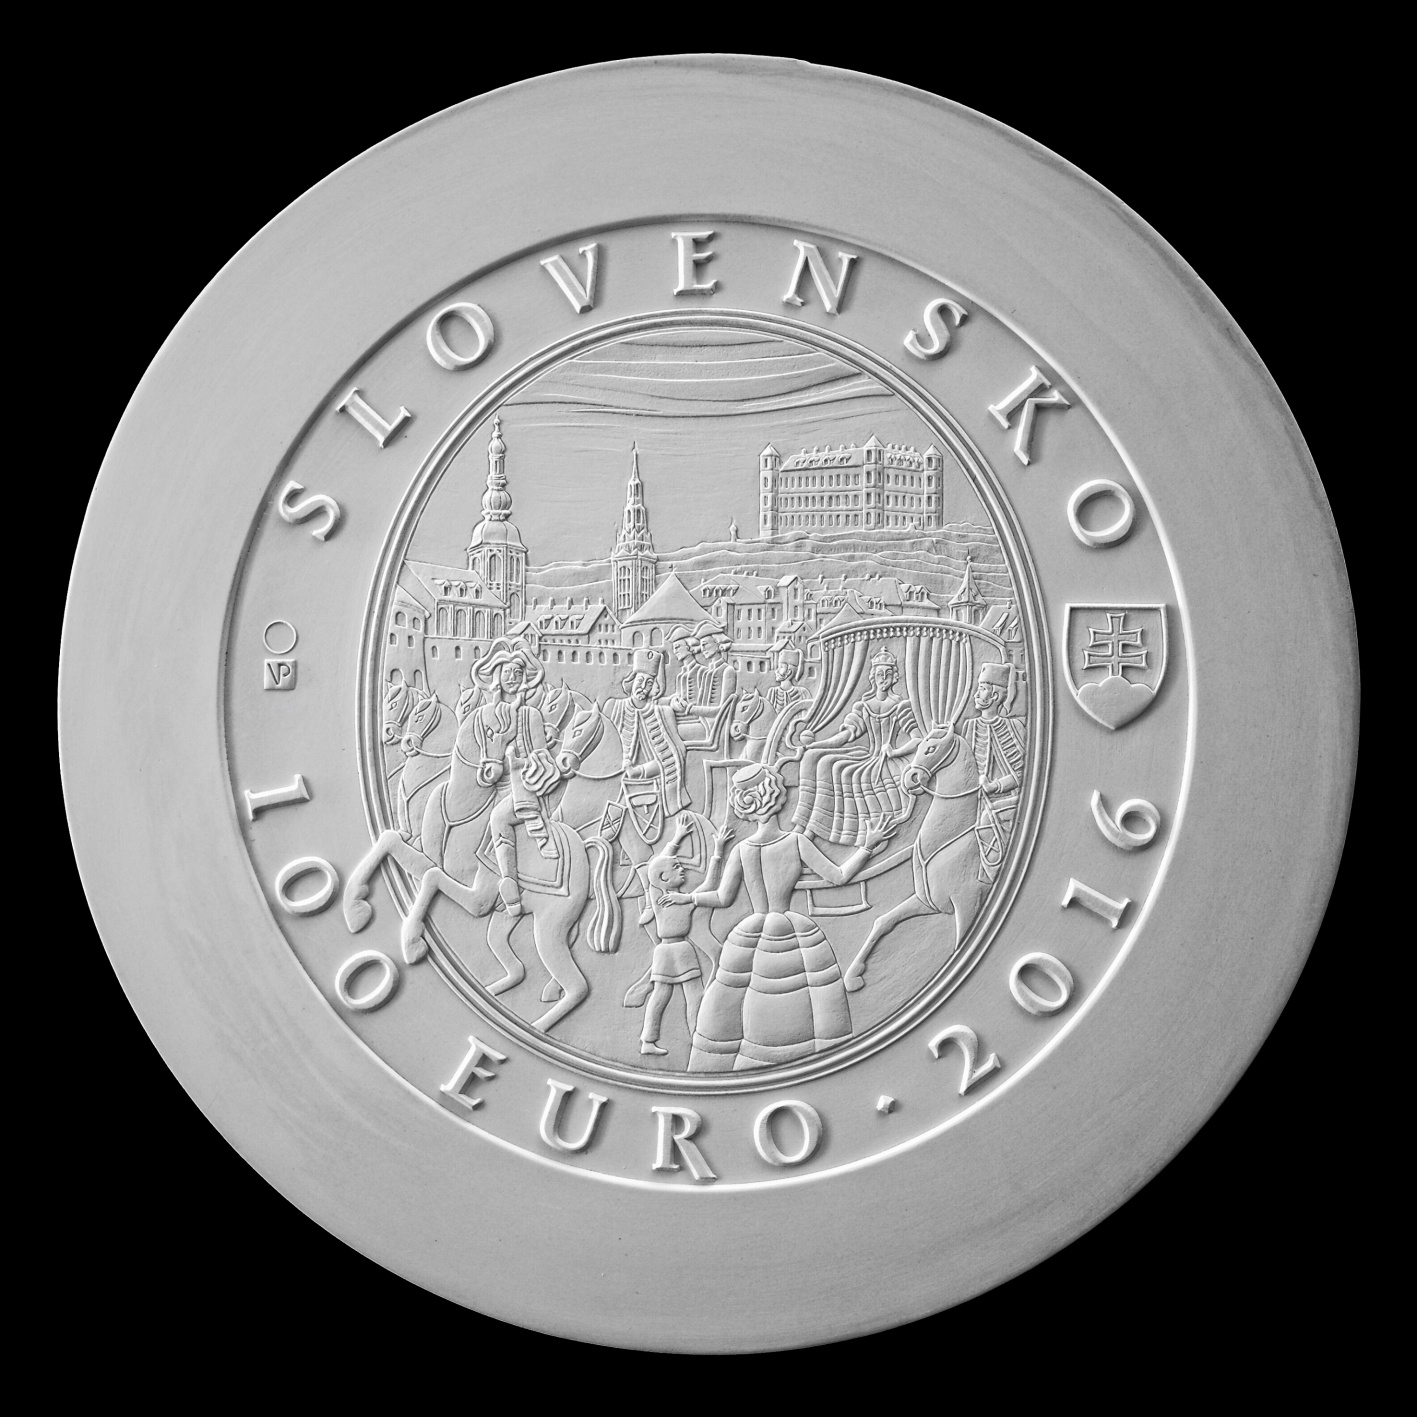 First prize (the design selected for the coin)